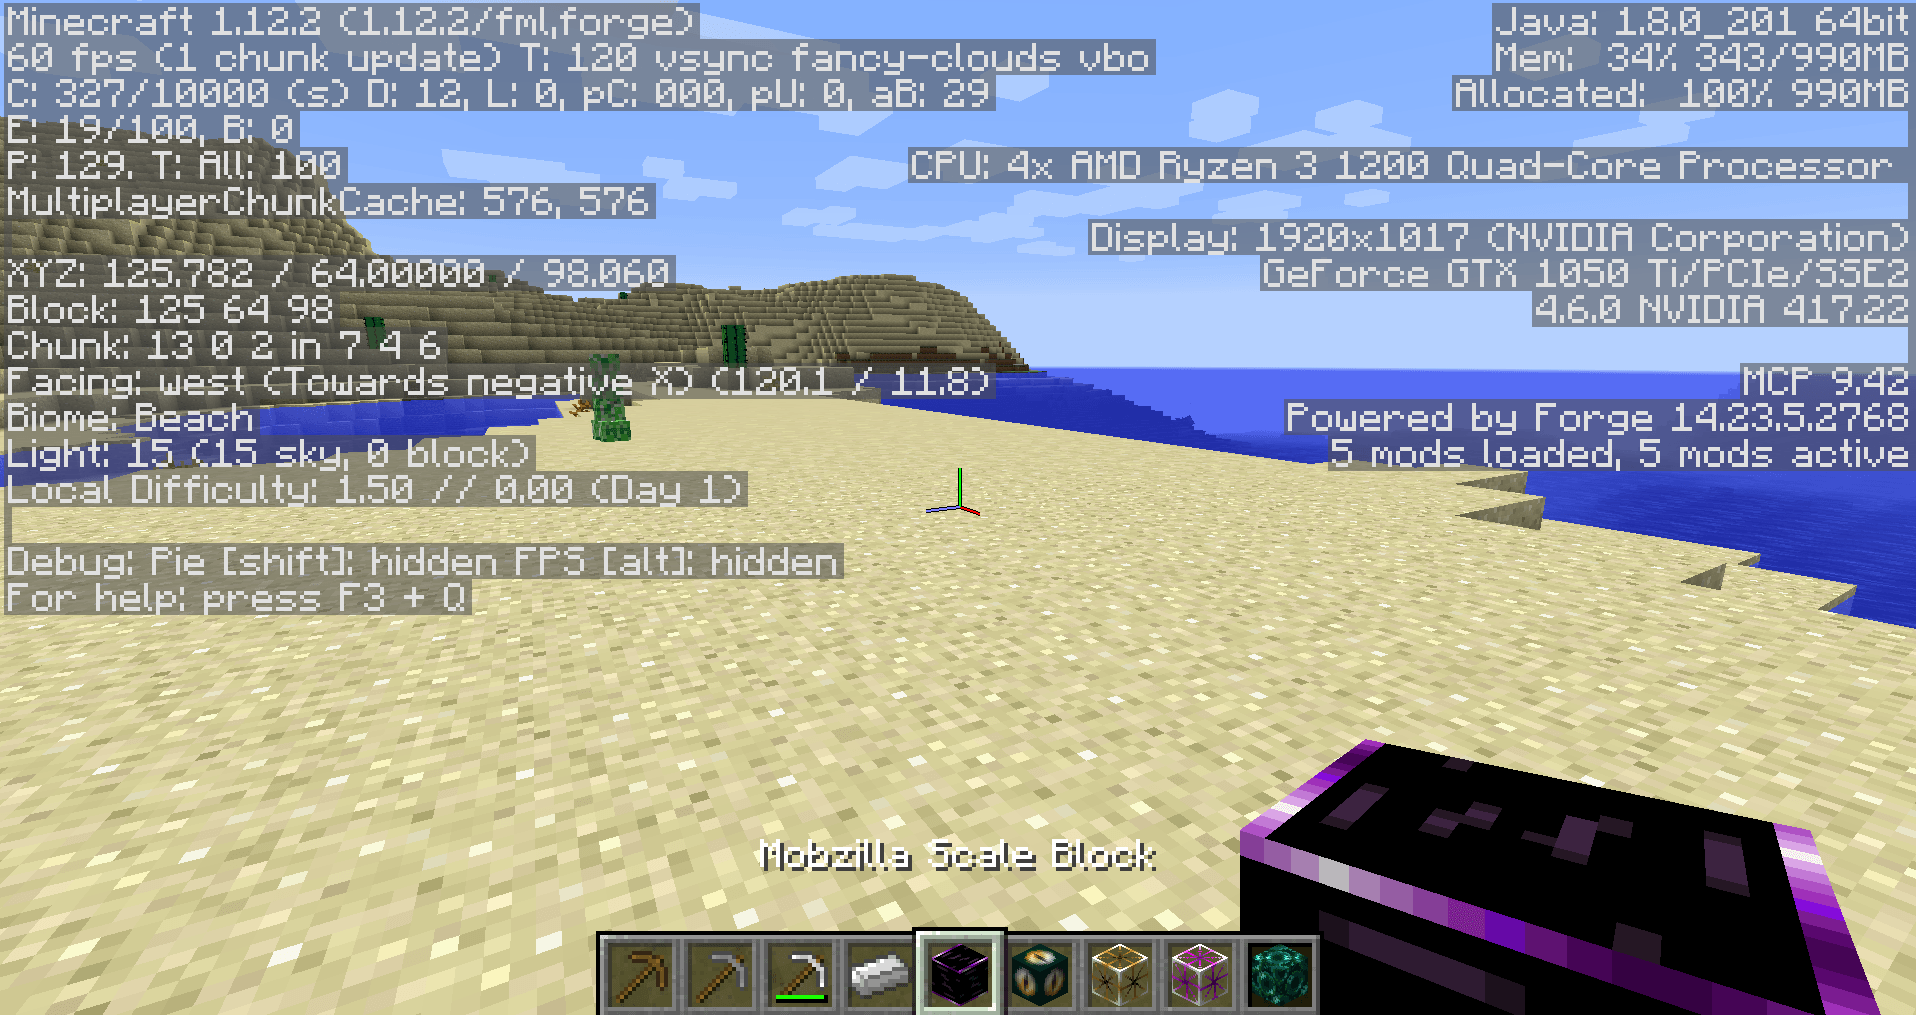 Mobzilla Logo - A Mobzilla Scale Block from OreSpawn in 1.12? I wonder how this got ...